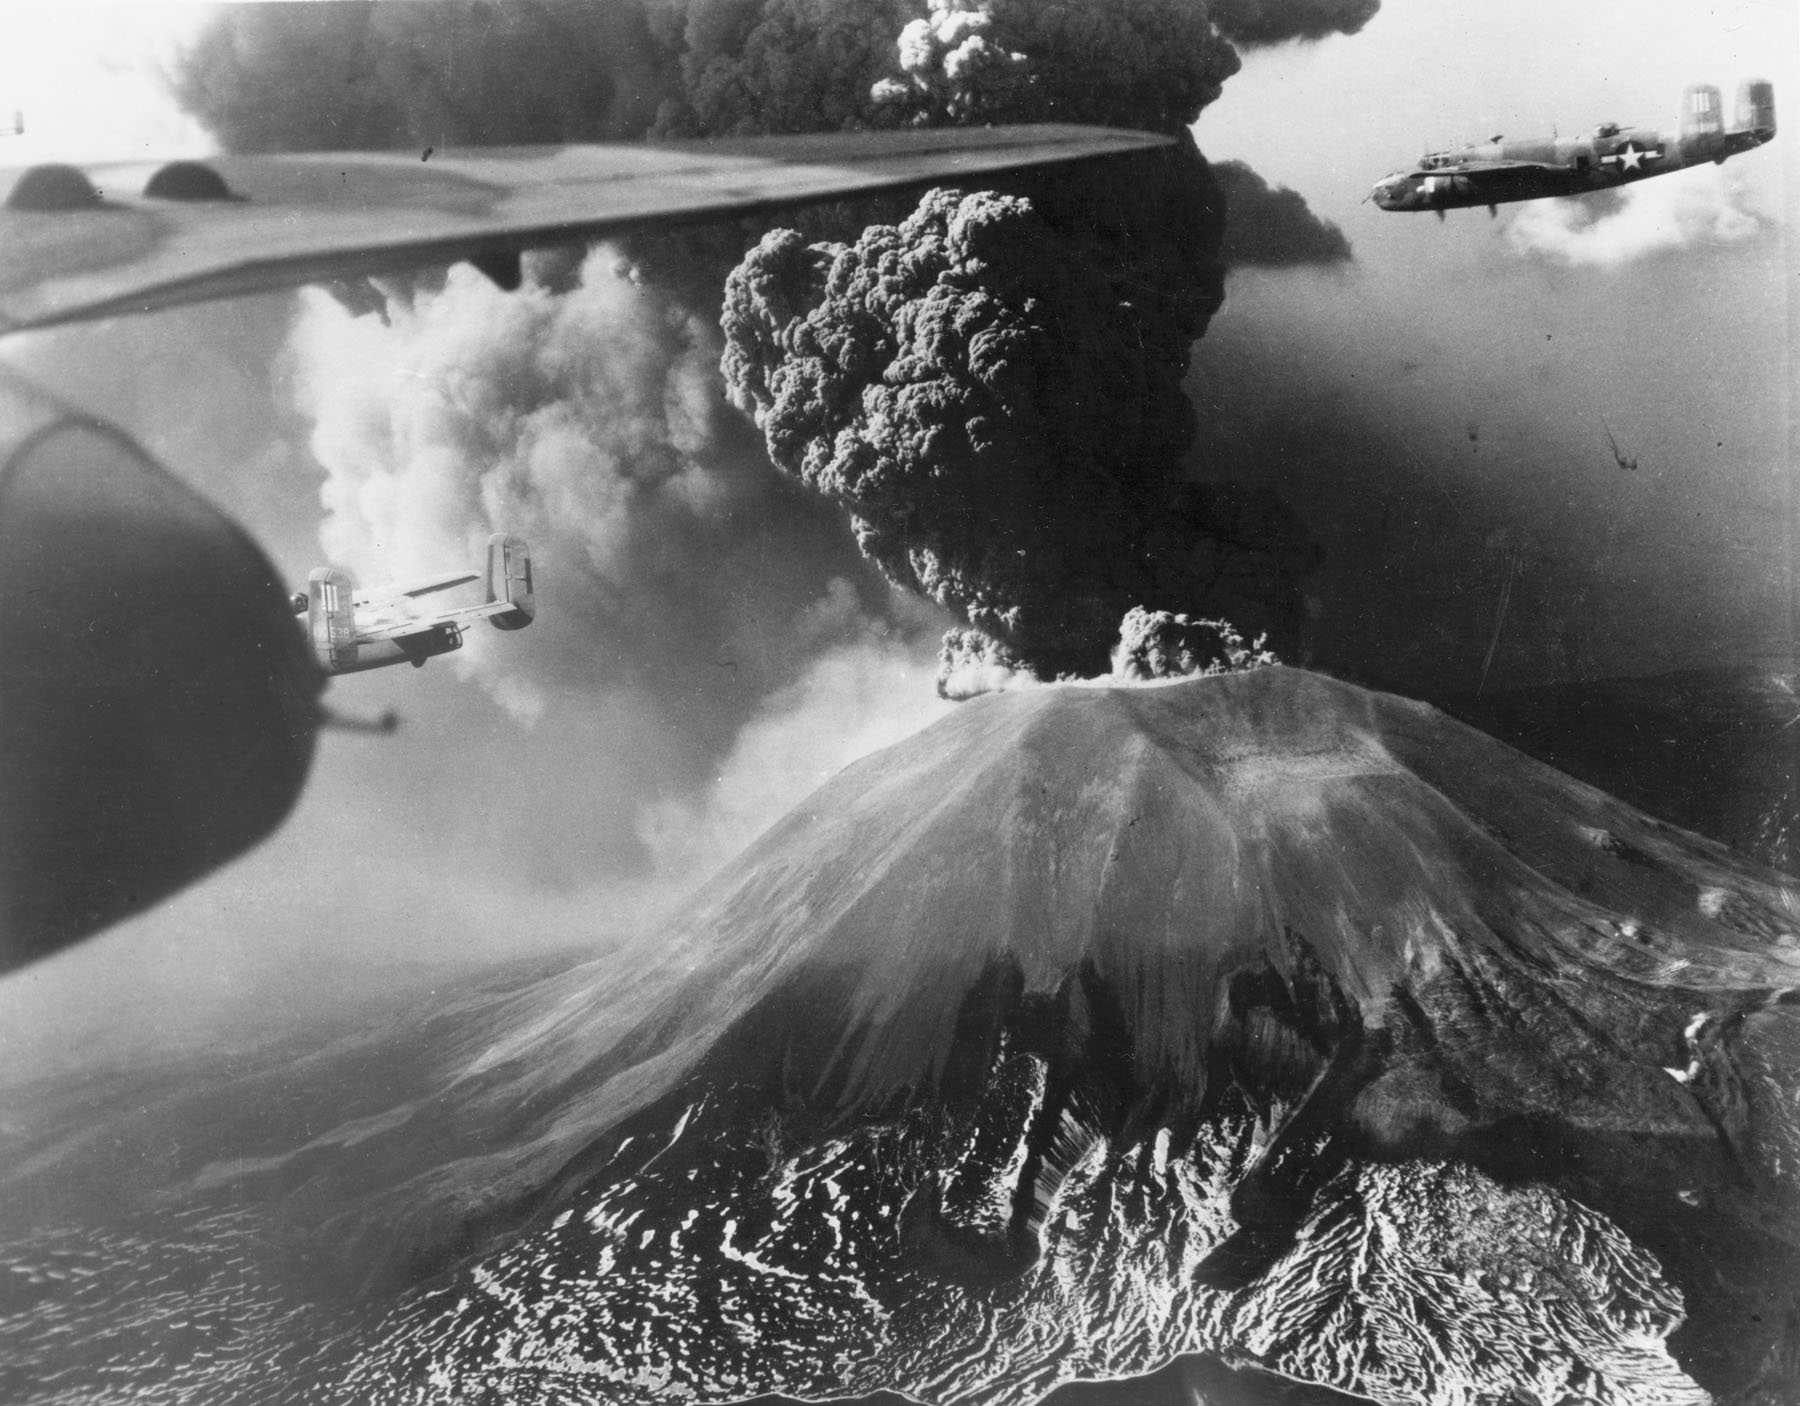 B-25 Mitchell bombers of 321st Bomber Group, US 447th Bomber Squadron flying past Mount Vesuvius, Italy during its eruption of 18-23 Mar 1944